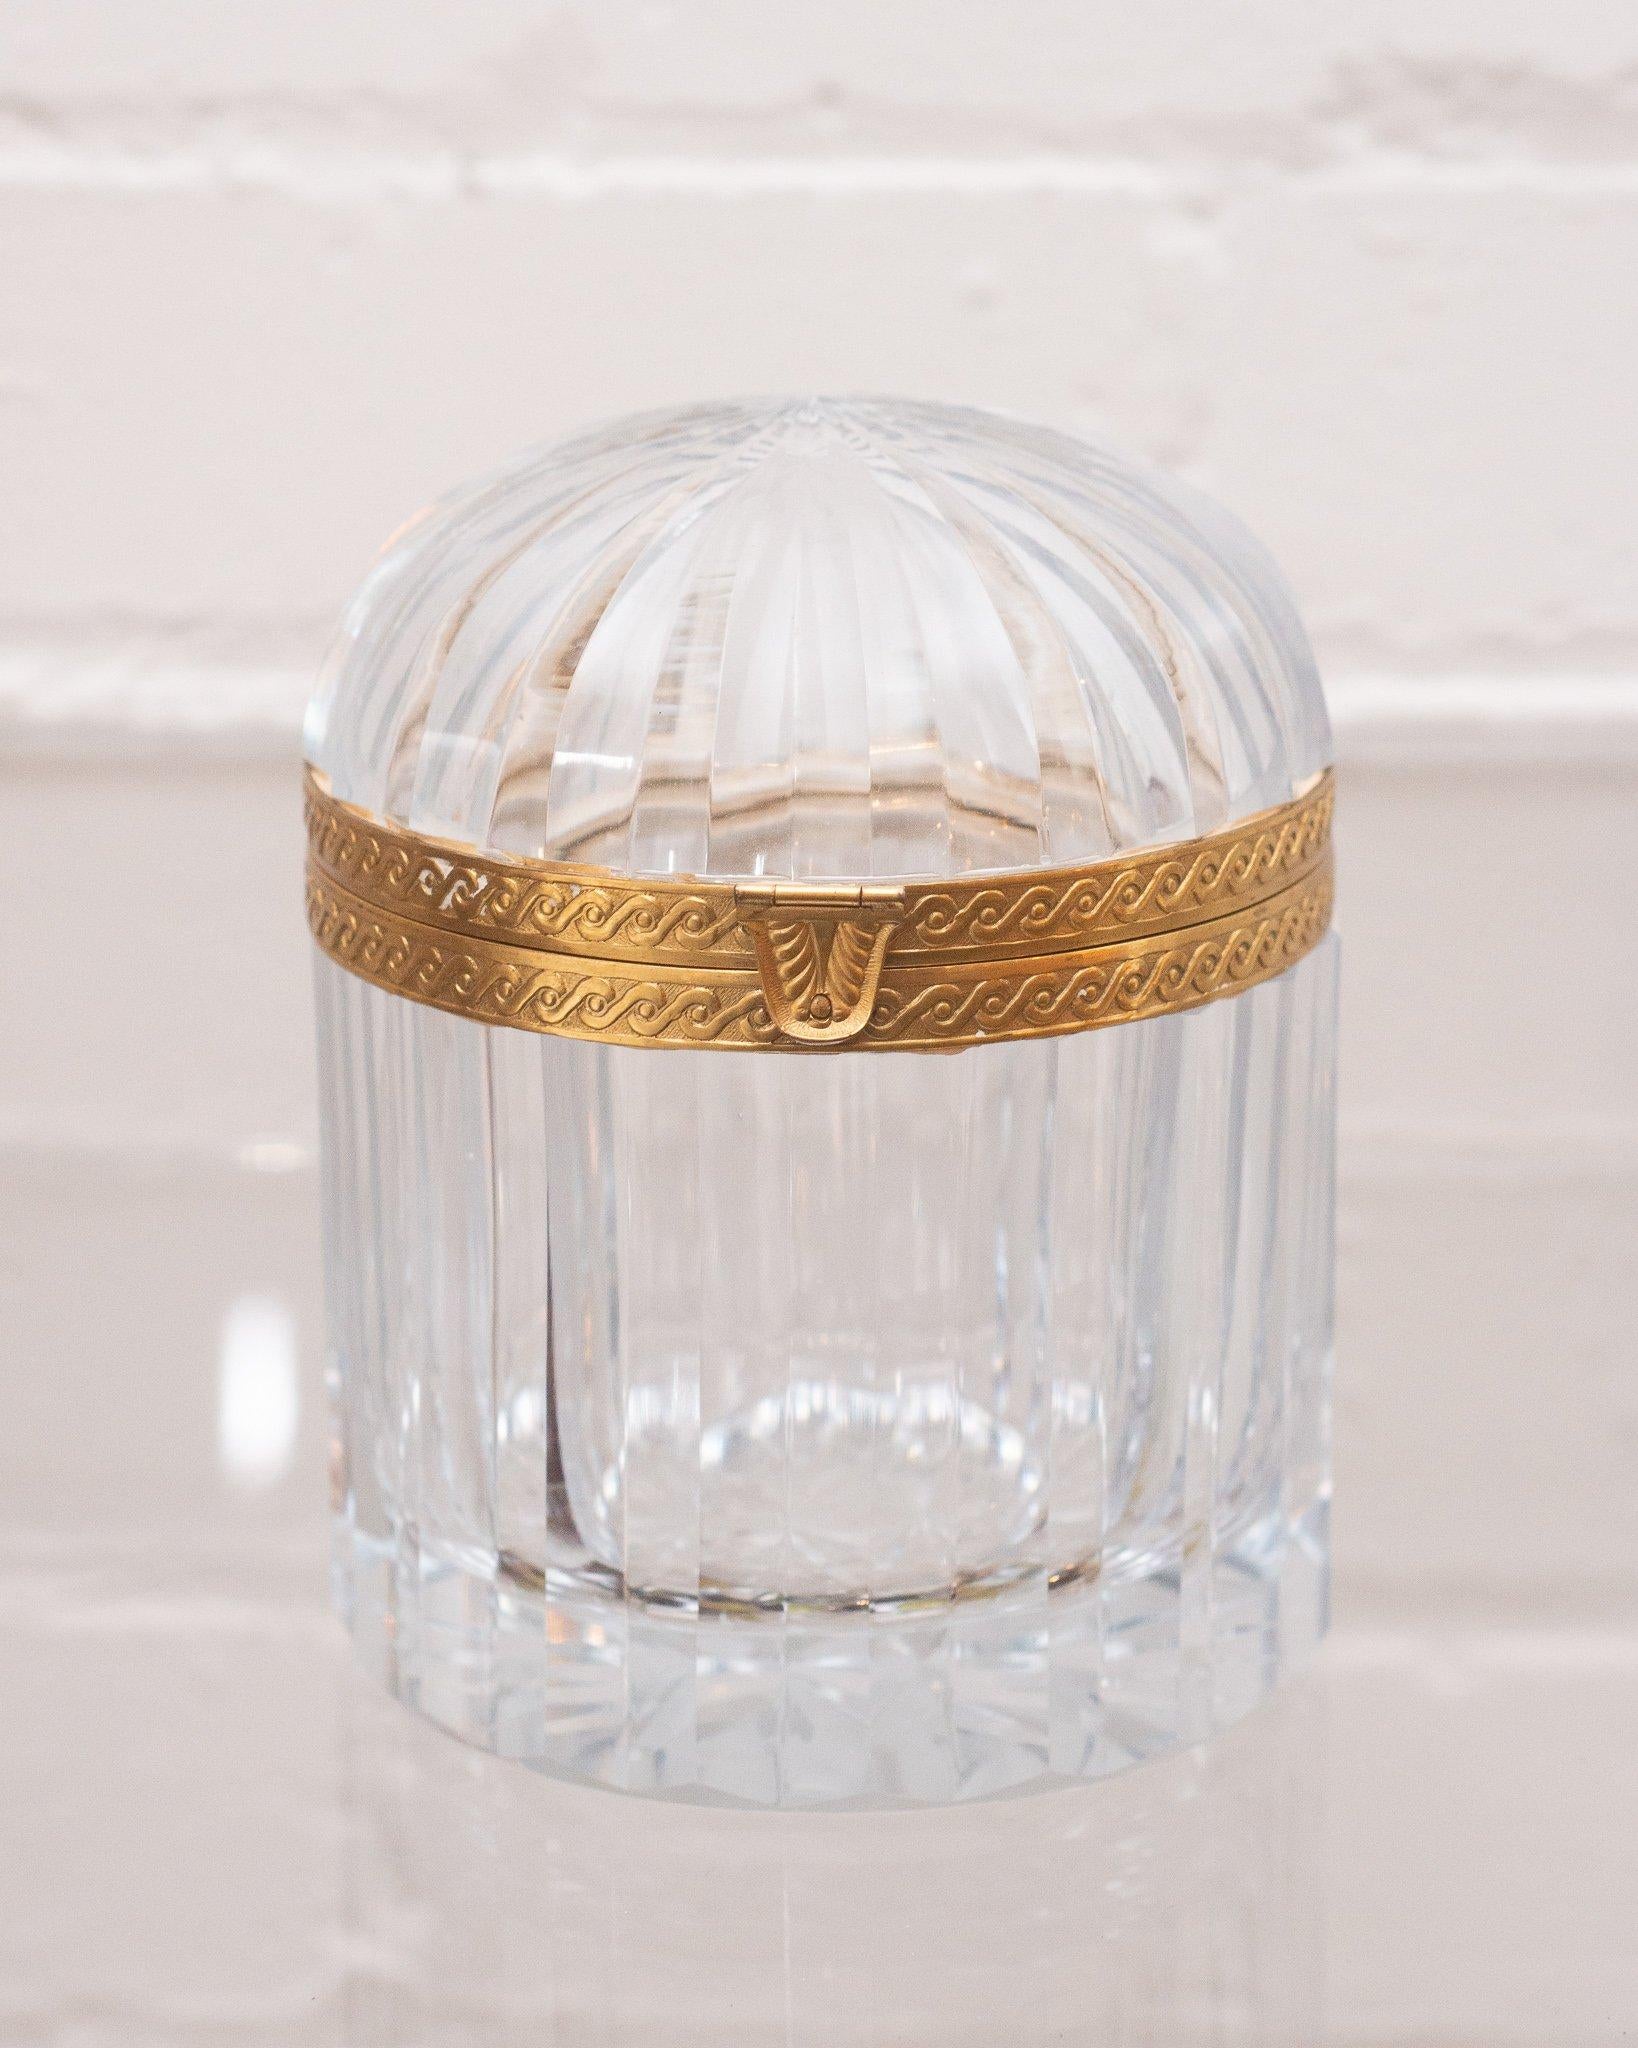 This antique French domed crystal and bronze box makes a statement in any space. An early 1900s production, this piece transitions from modern to Classic interiors seamlessly with its sophisticated shape and light catching quality.